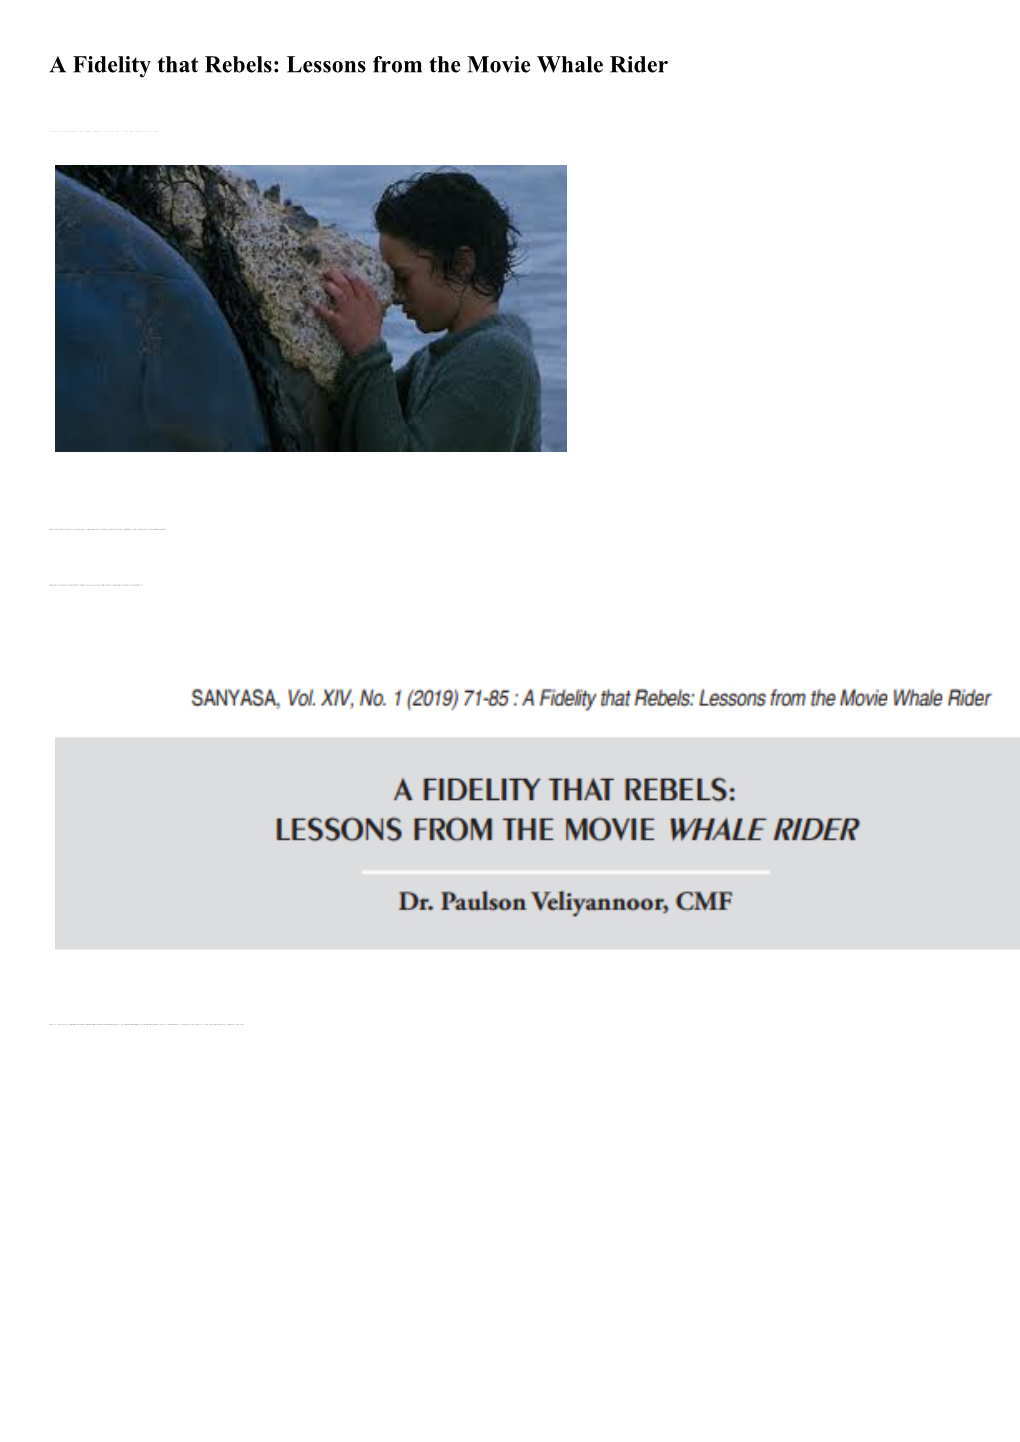 Lessons from the Movie Whale Rider